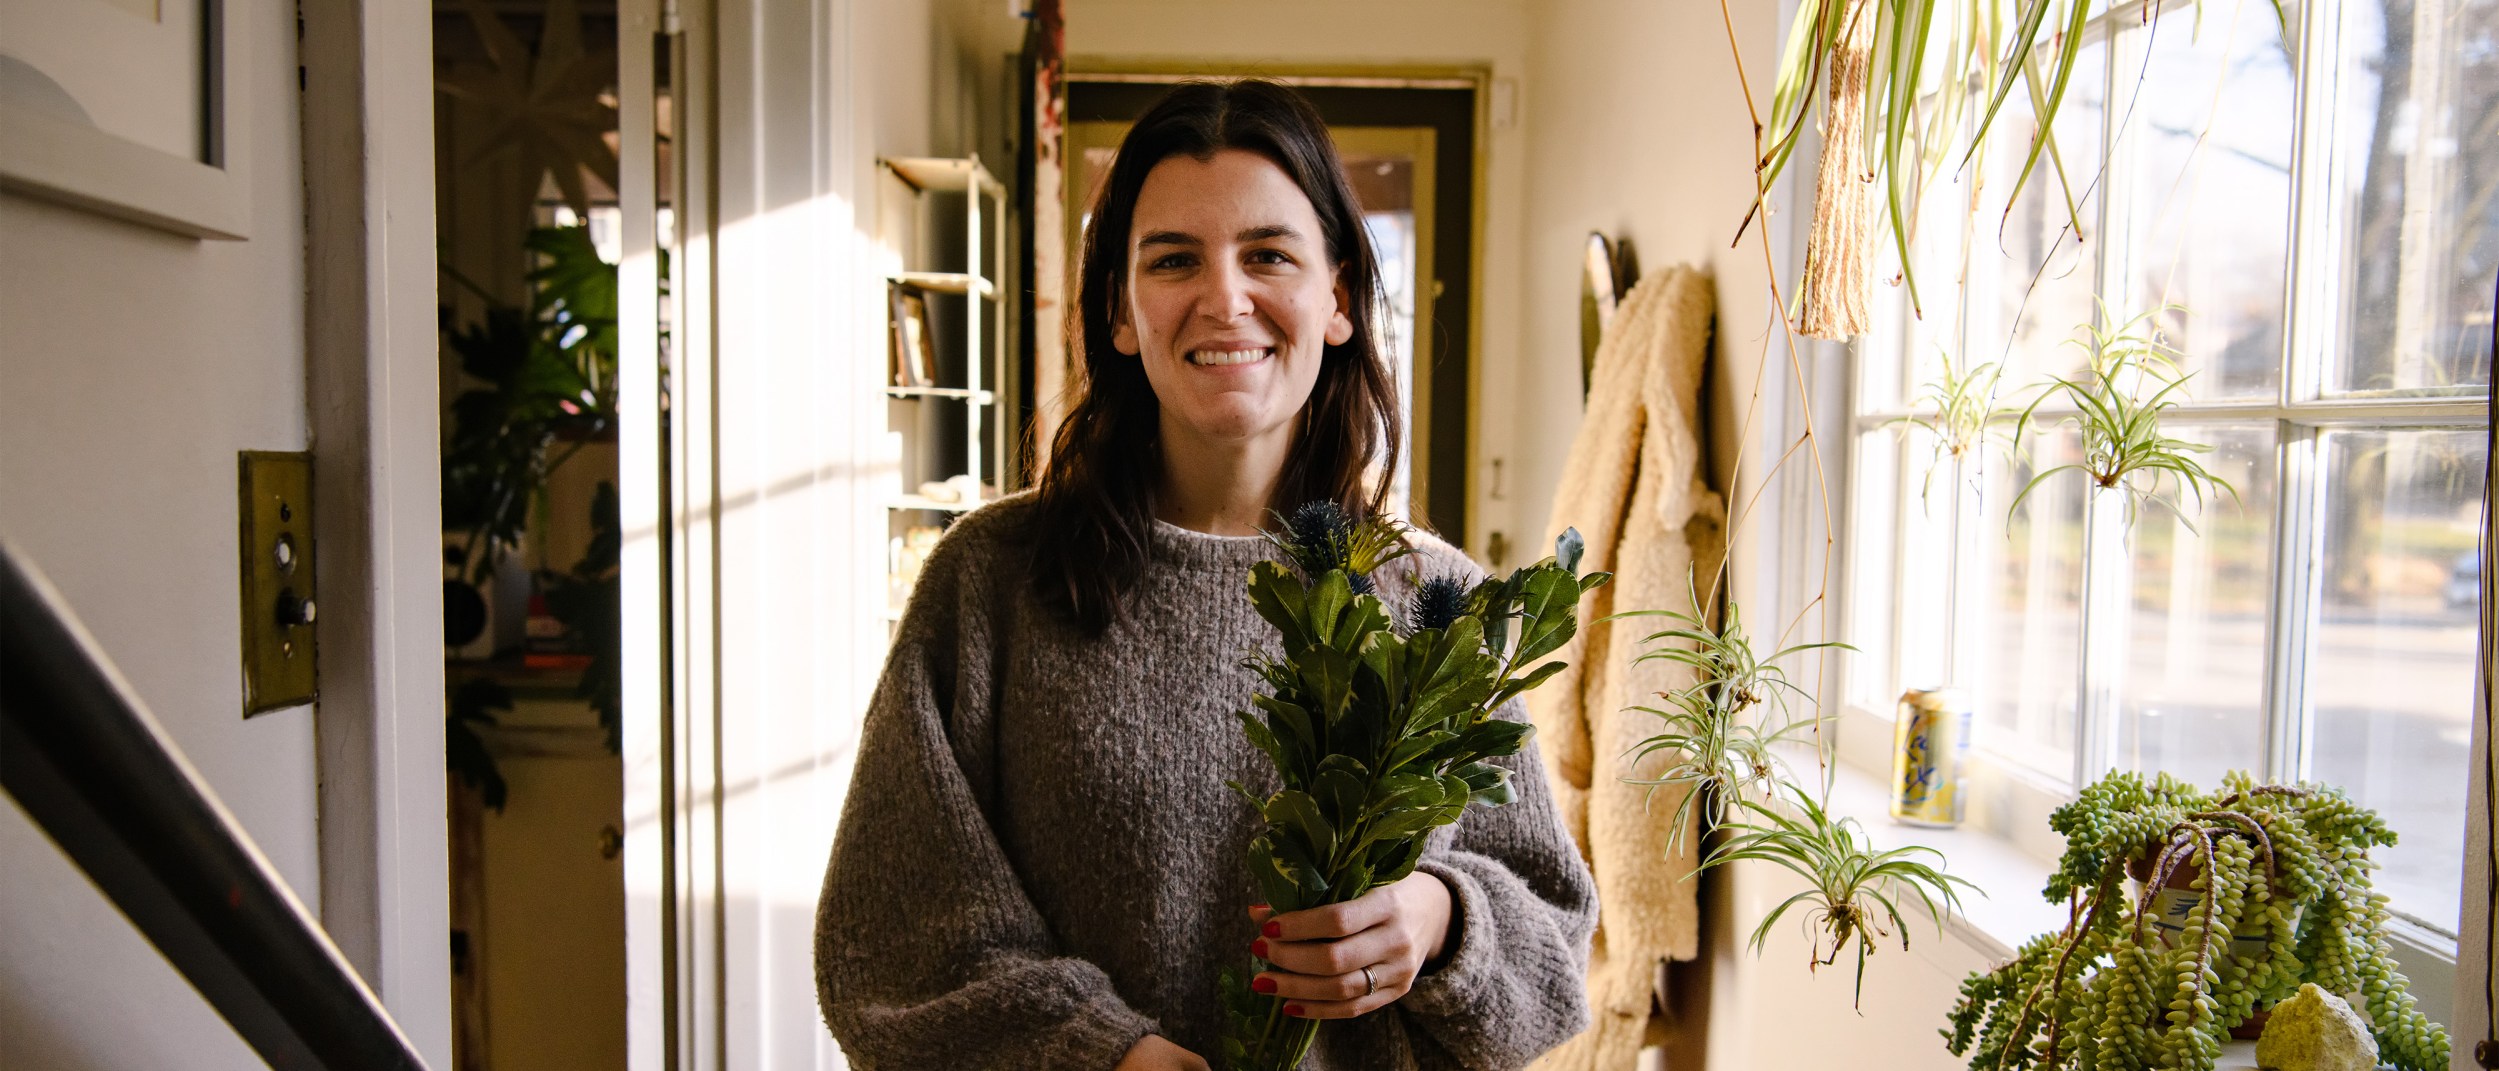 An Airbnb hosts prepares for her guests with some fresh flowers.